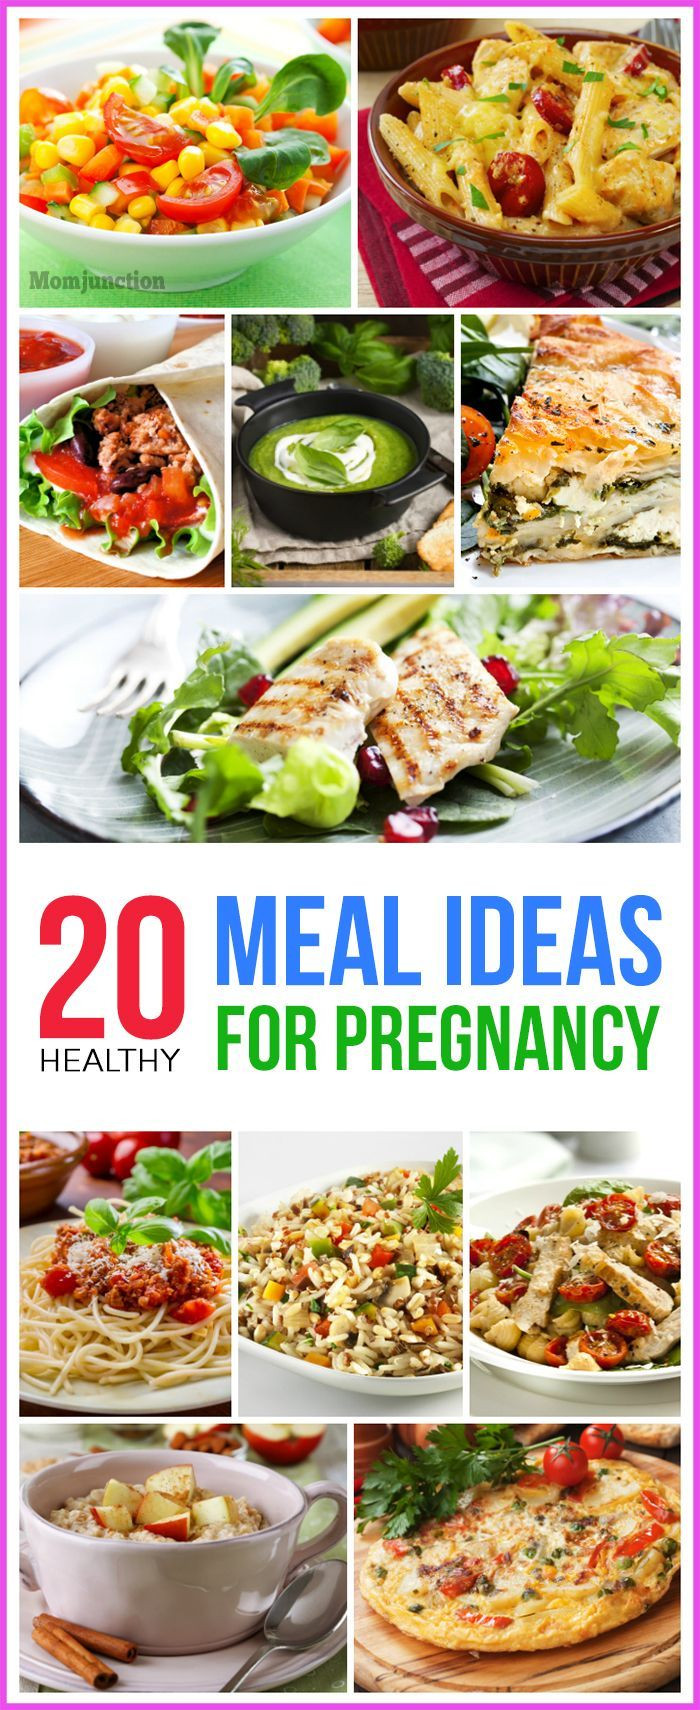 Healthy Pregnancy Lunches
 Best 25 Happy healthy ideas on Pinterest